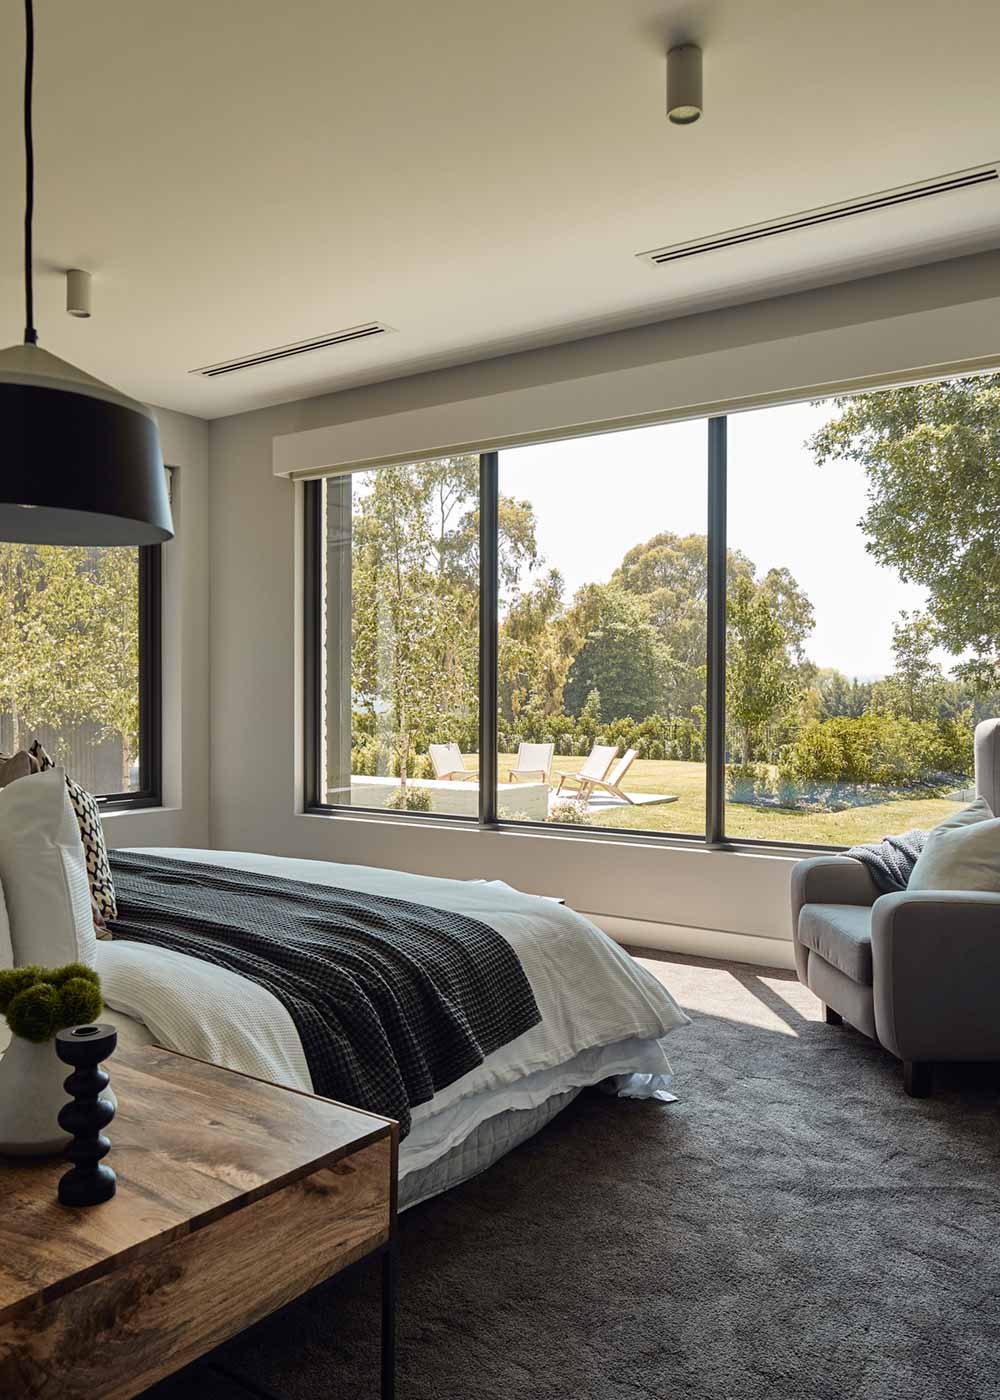 modern country home design bedroom arb - House in Silhouette